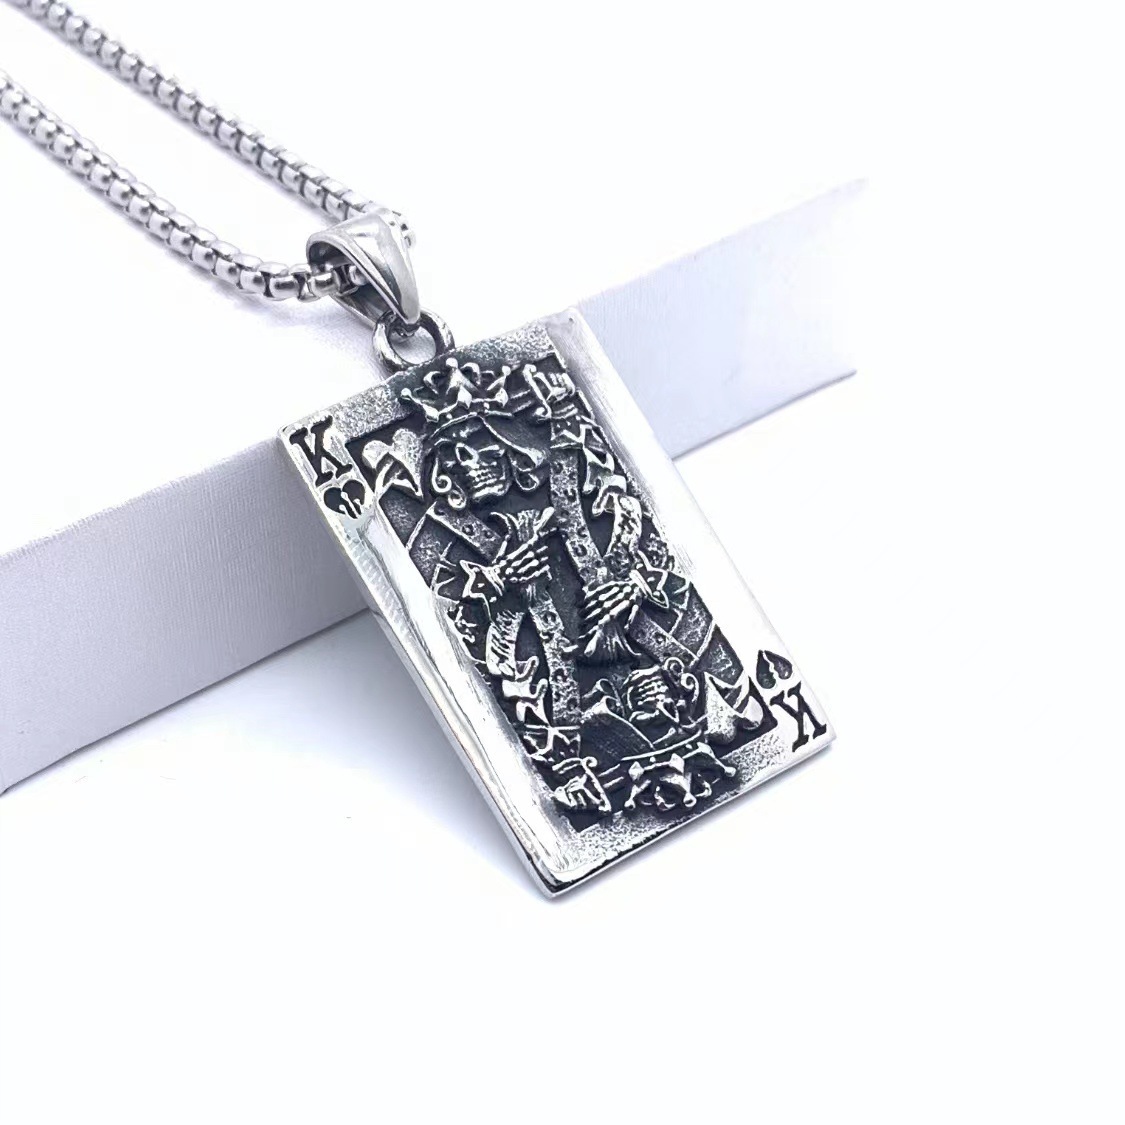 1:Type A pendant (without matching chain)-39 * 26mm